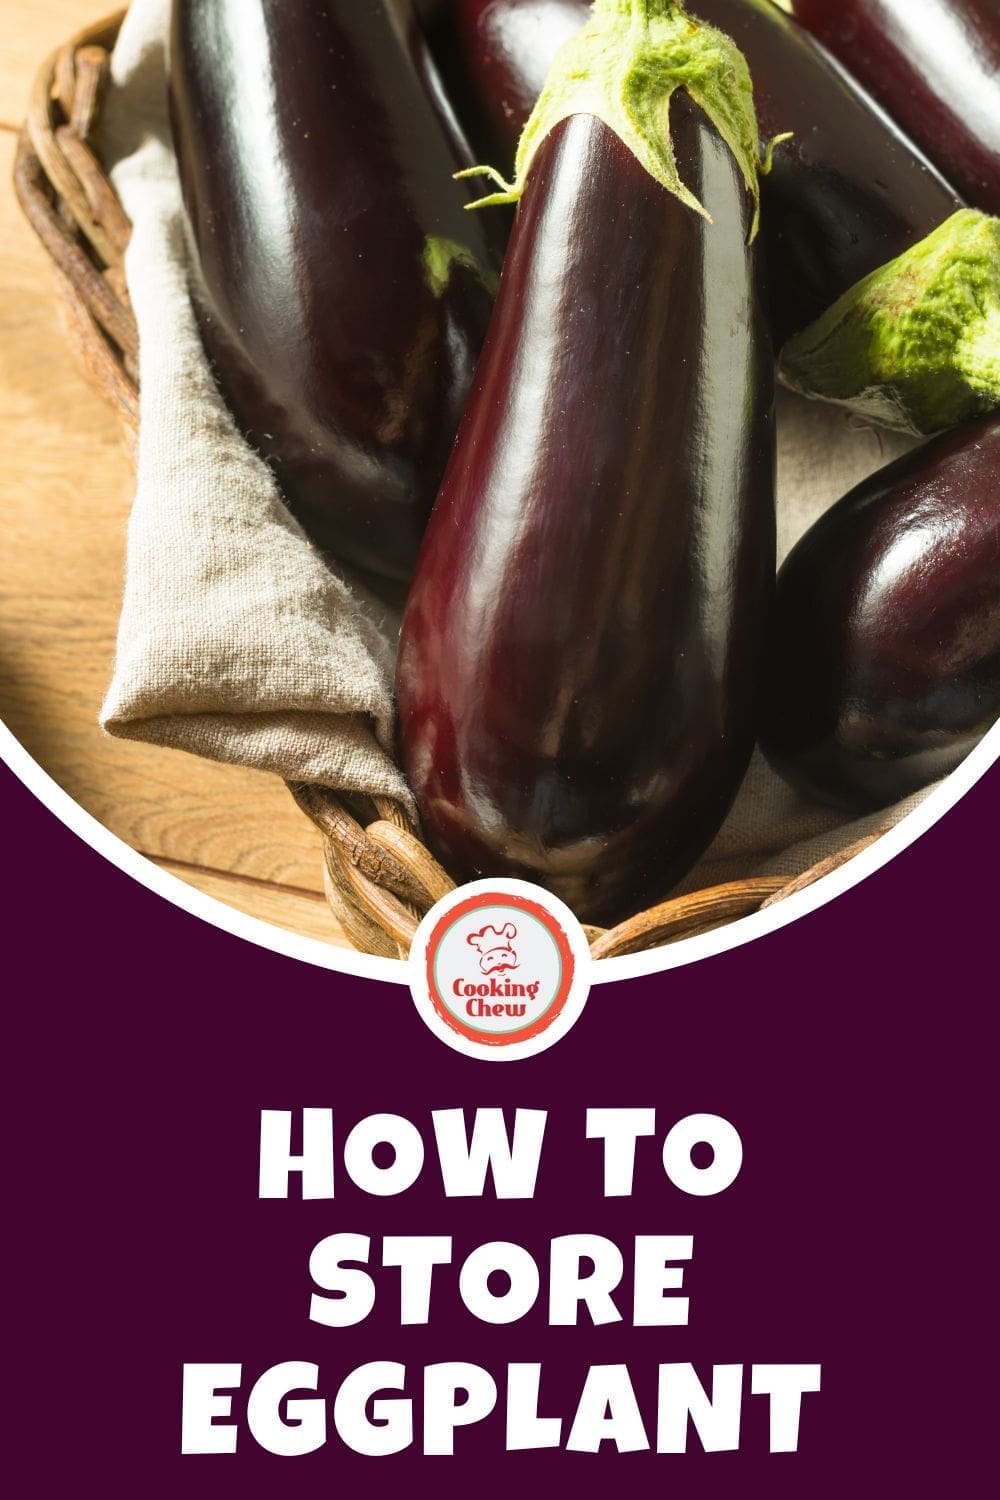 How To Store Eggplant (Only What You Need To know)